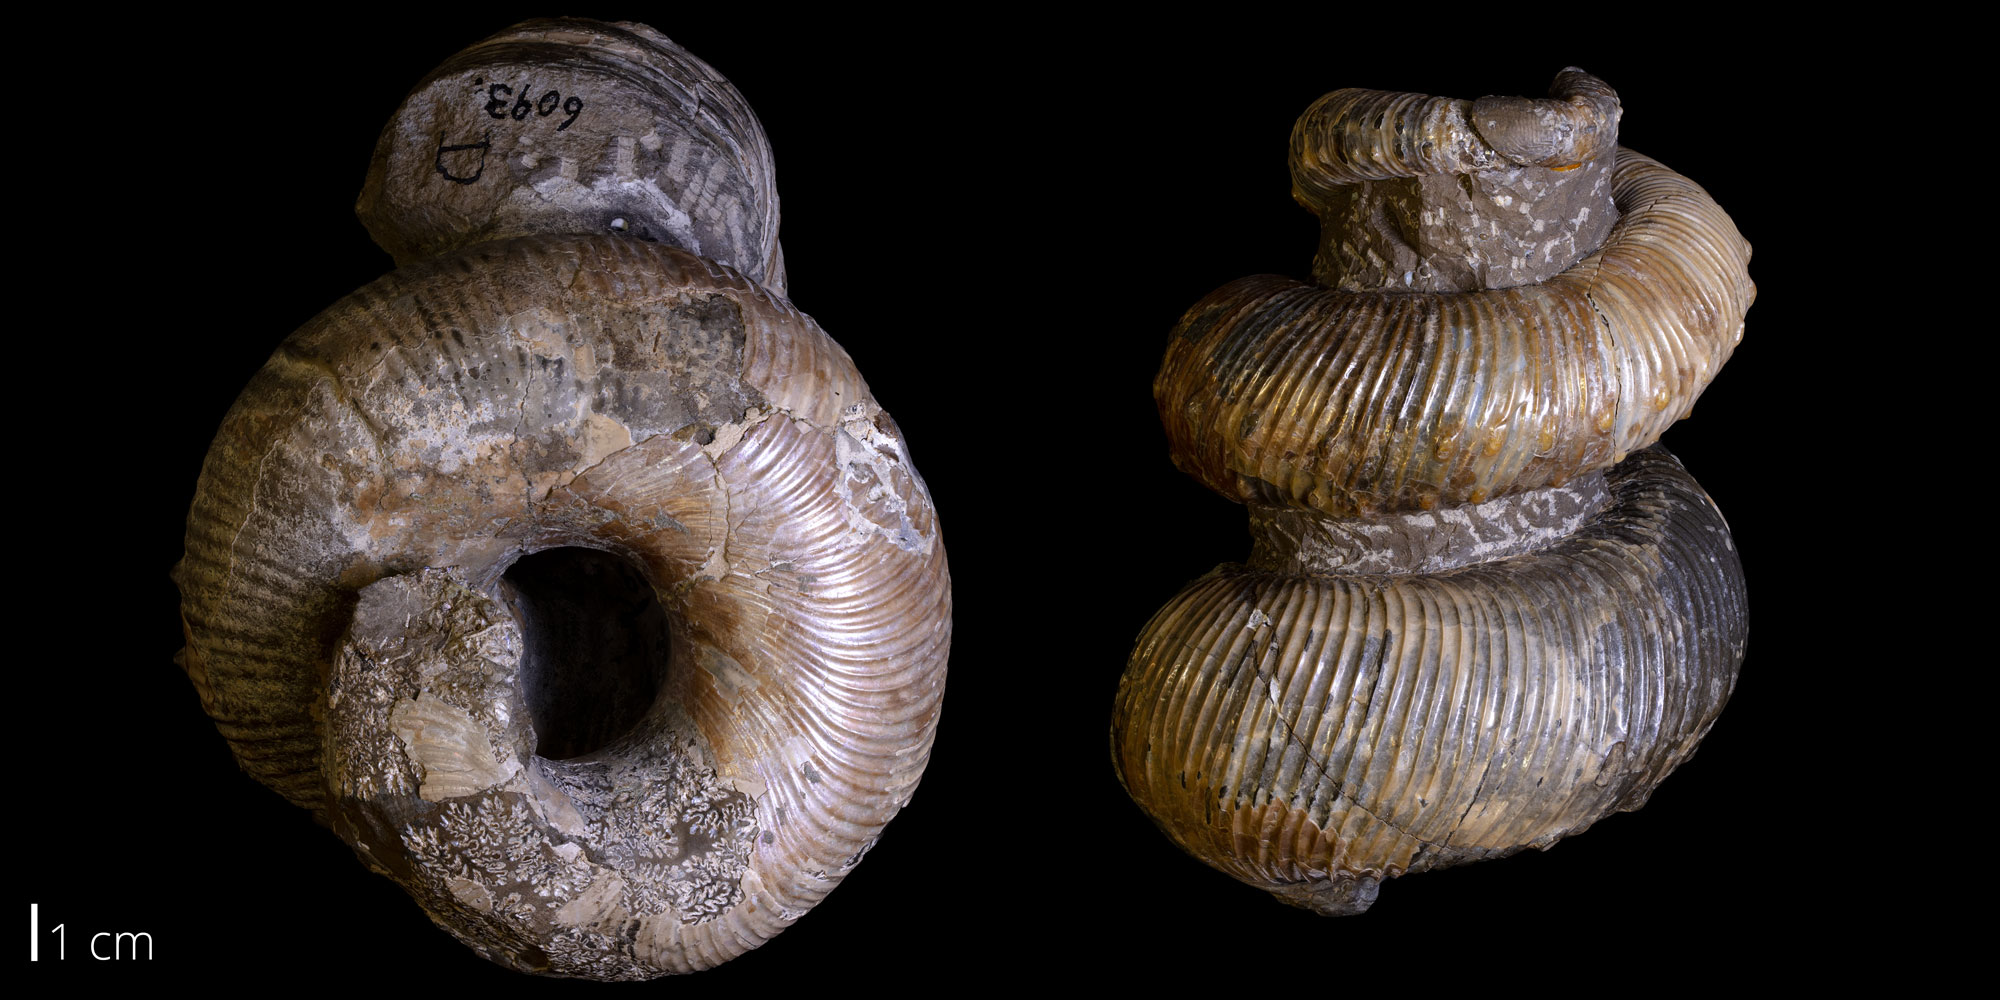 Photos showing two views of a heteromorph ammonoid shell from the Late Cretaceous of South Dakota. The photo shows the shell from the base (near the aperature) and from the side. The shell forms a loose coil. It is light brown to black in color and shiny. In the center of the shell is a pillar of the original rock matrix, which is brown.